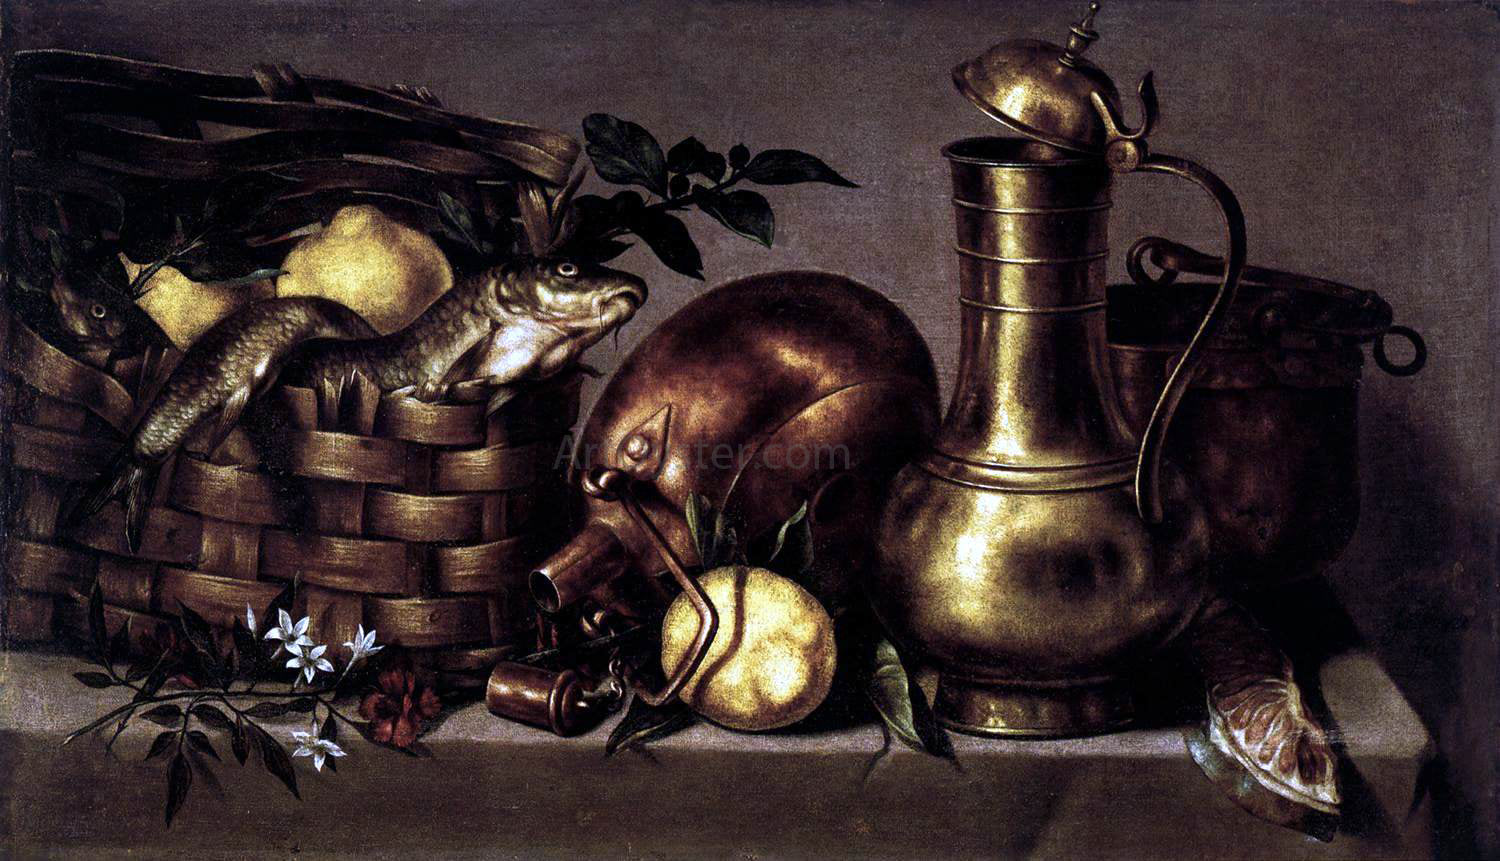  Antonio Ponce Still-Life in the Kitchen - Hand Painted Oil Painting